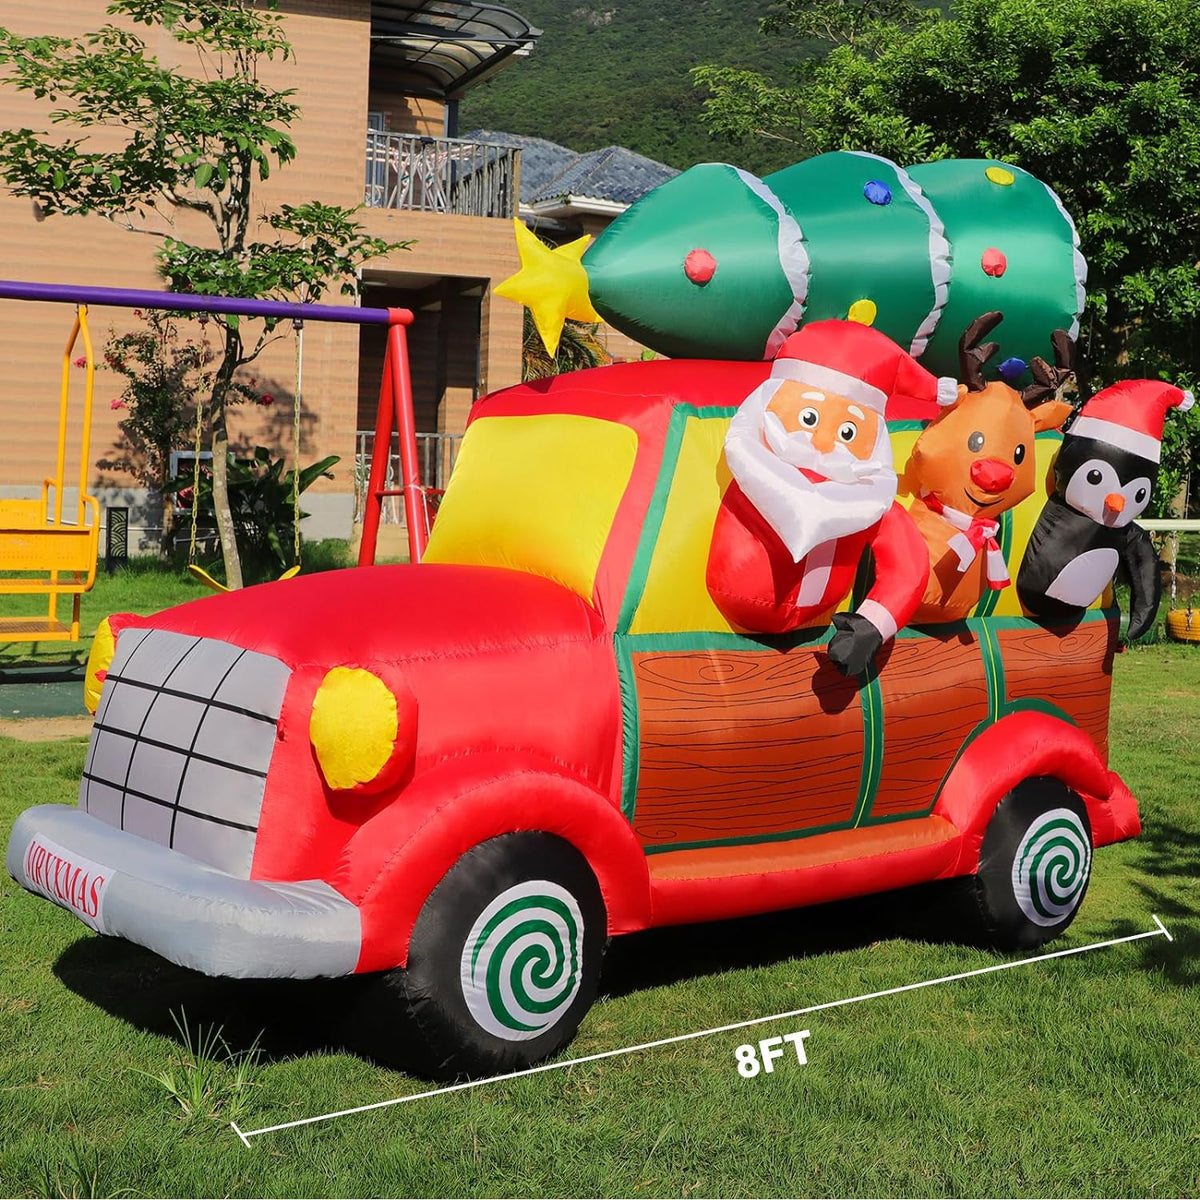 8 FT Christmas Inflatable Car with Santa Claus, Christmas Tree, Elk, Penguin, Blow Up Outdoor Decoration with Built-in Lights, Lovely Xmas Van for Holiday Yard Lawn Garden Display Party Festival Decor